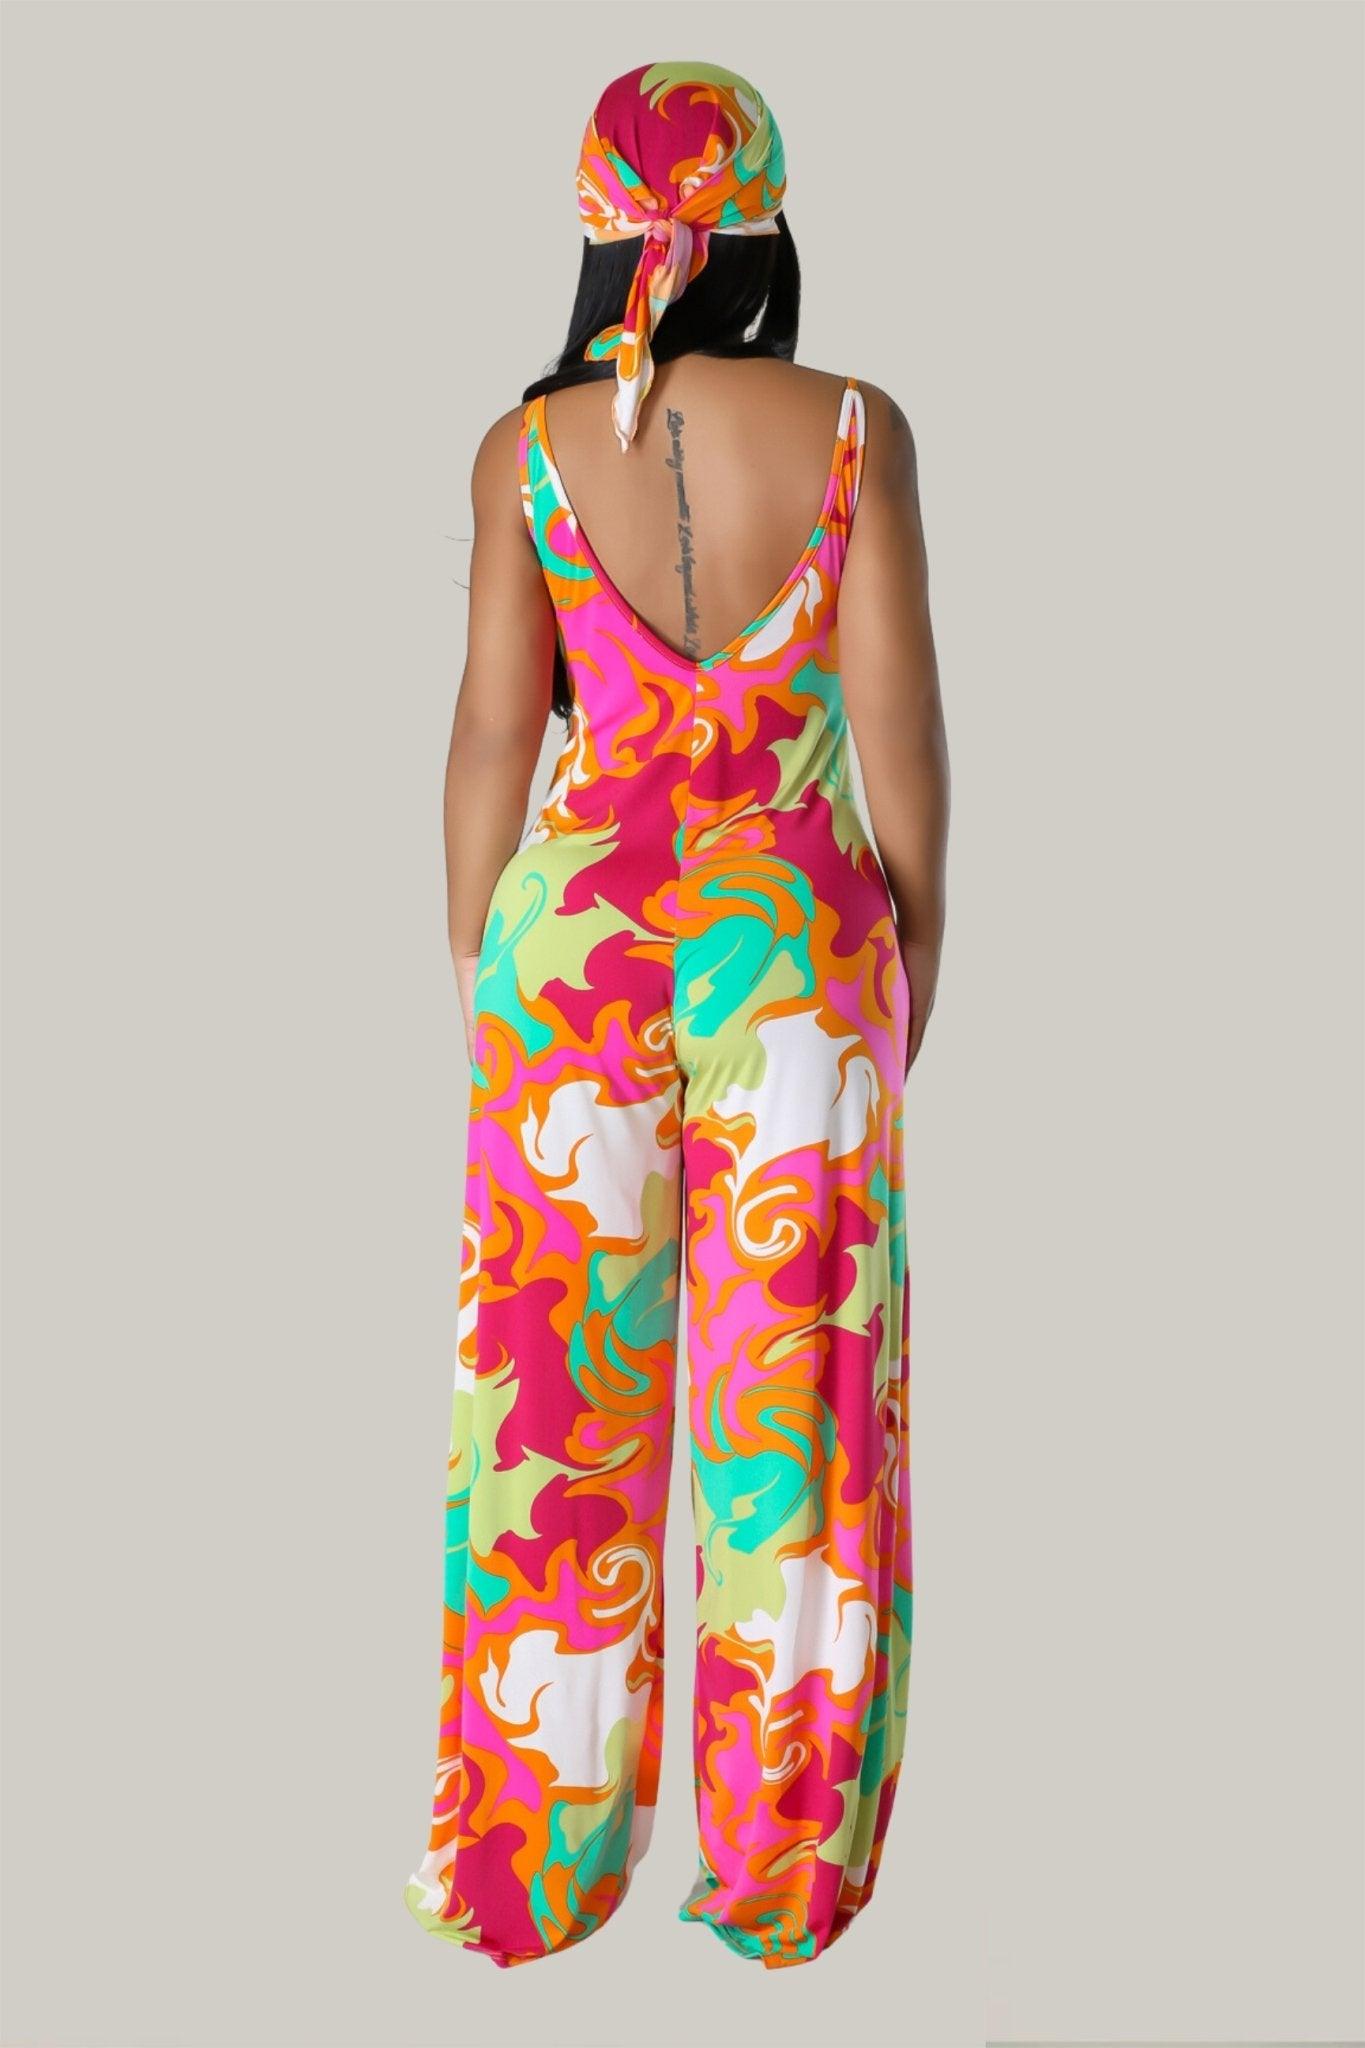 Dreamy Daisies Stretch Jumpsuit - MY SEXY STYLES